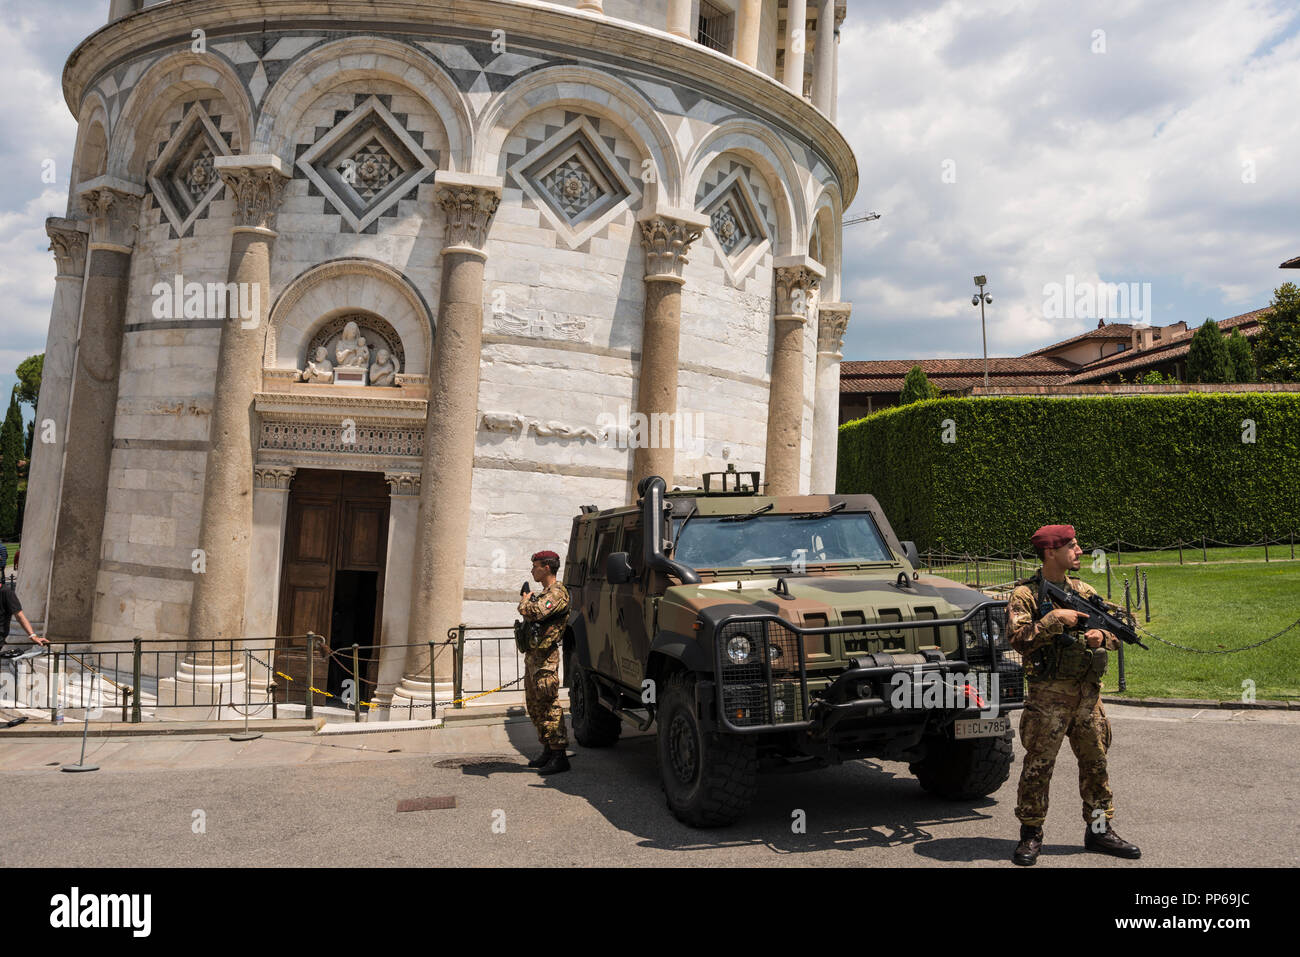 Armoured vehicle and soldiers with automatic rifles to protect public in case of terrorist atttck,  Pisa, Tuscany, Italy Stock Photo